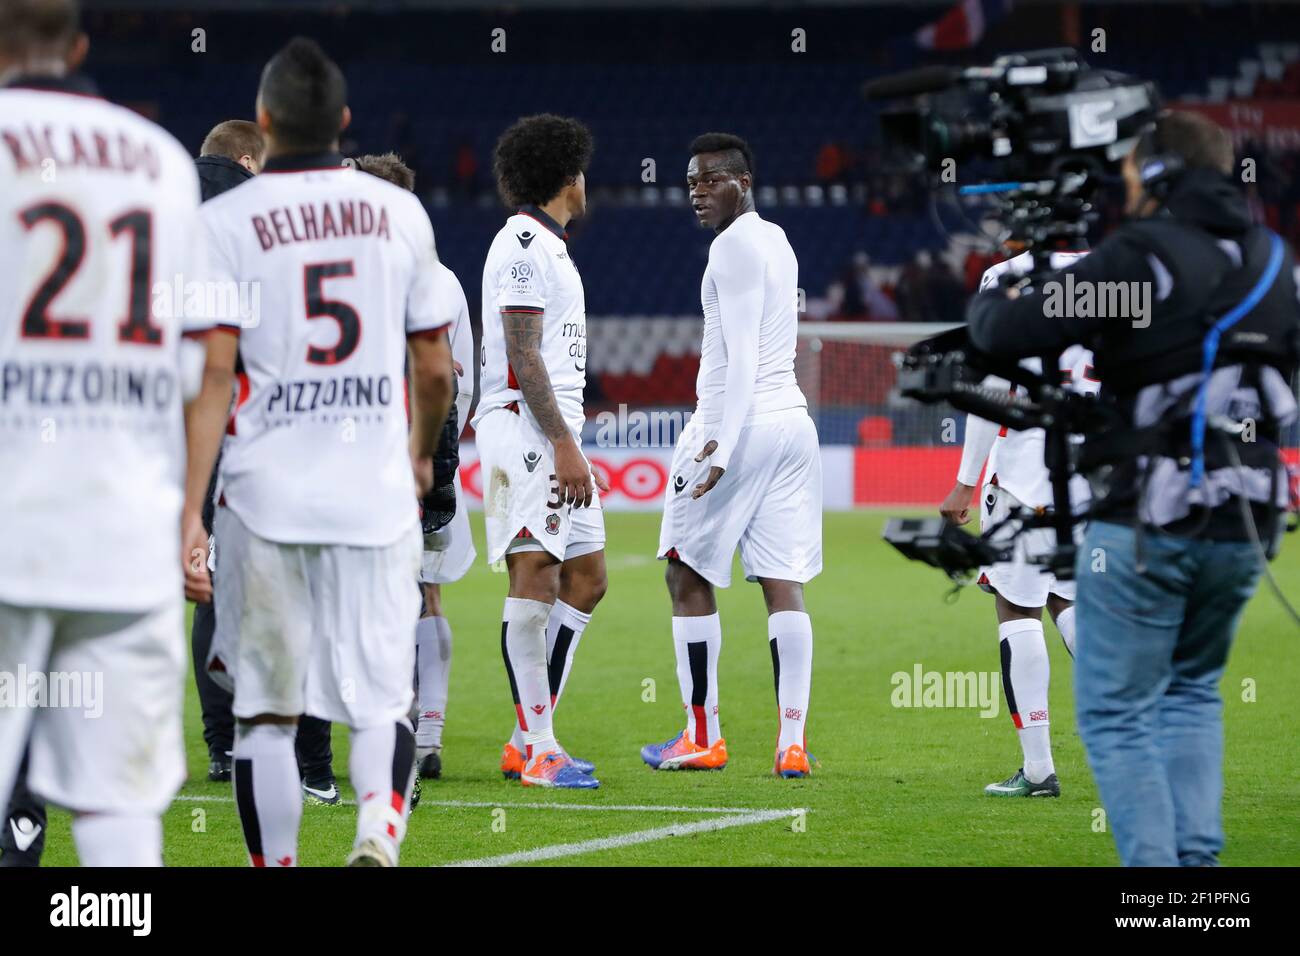 Mario Balotelli (Olympique Gymnaste Club Nice Cote d Azur - OGC Nice)  during the French Championship Ligue 1 football match between Paris  Saint-Germain and OGC Nice on December 11, 2016 at Parc